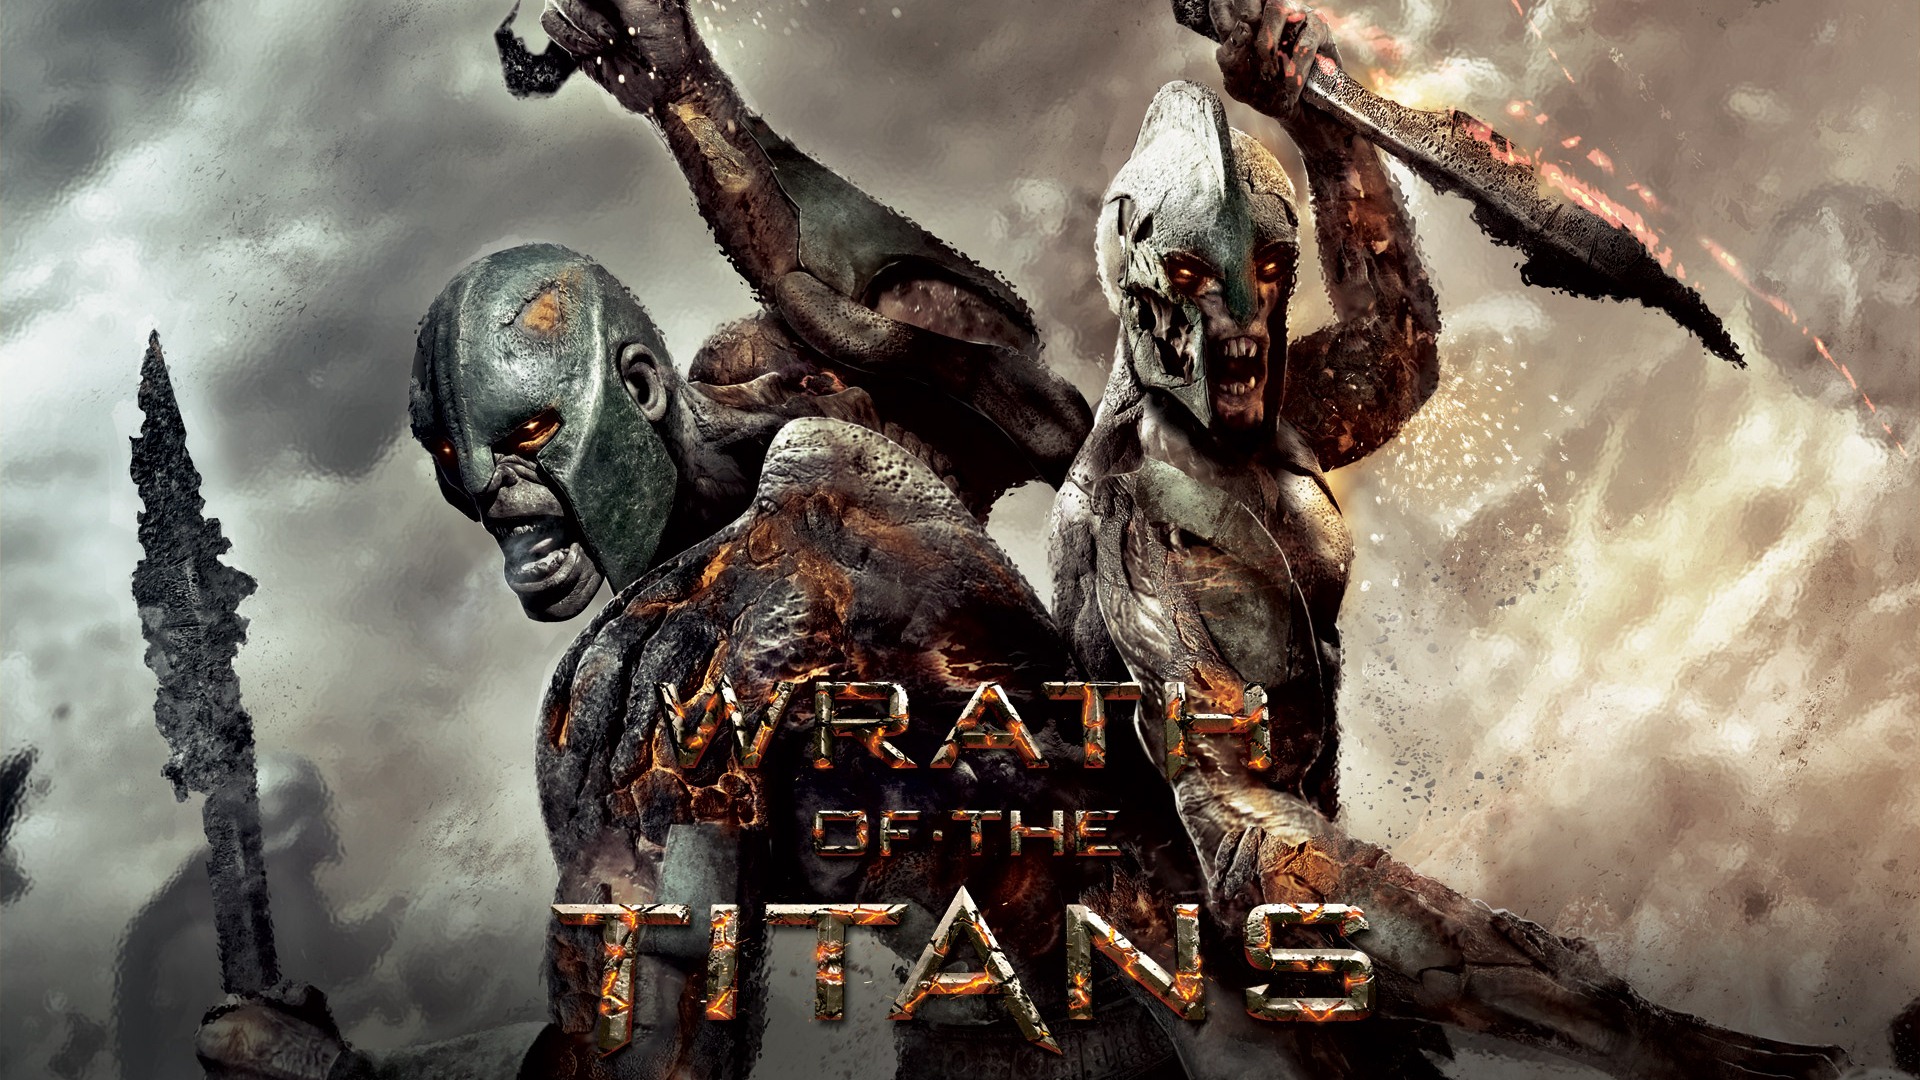 Wrath of the Titans HD Wallpapers #6 - 1920x1080